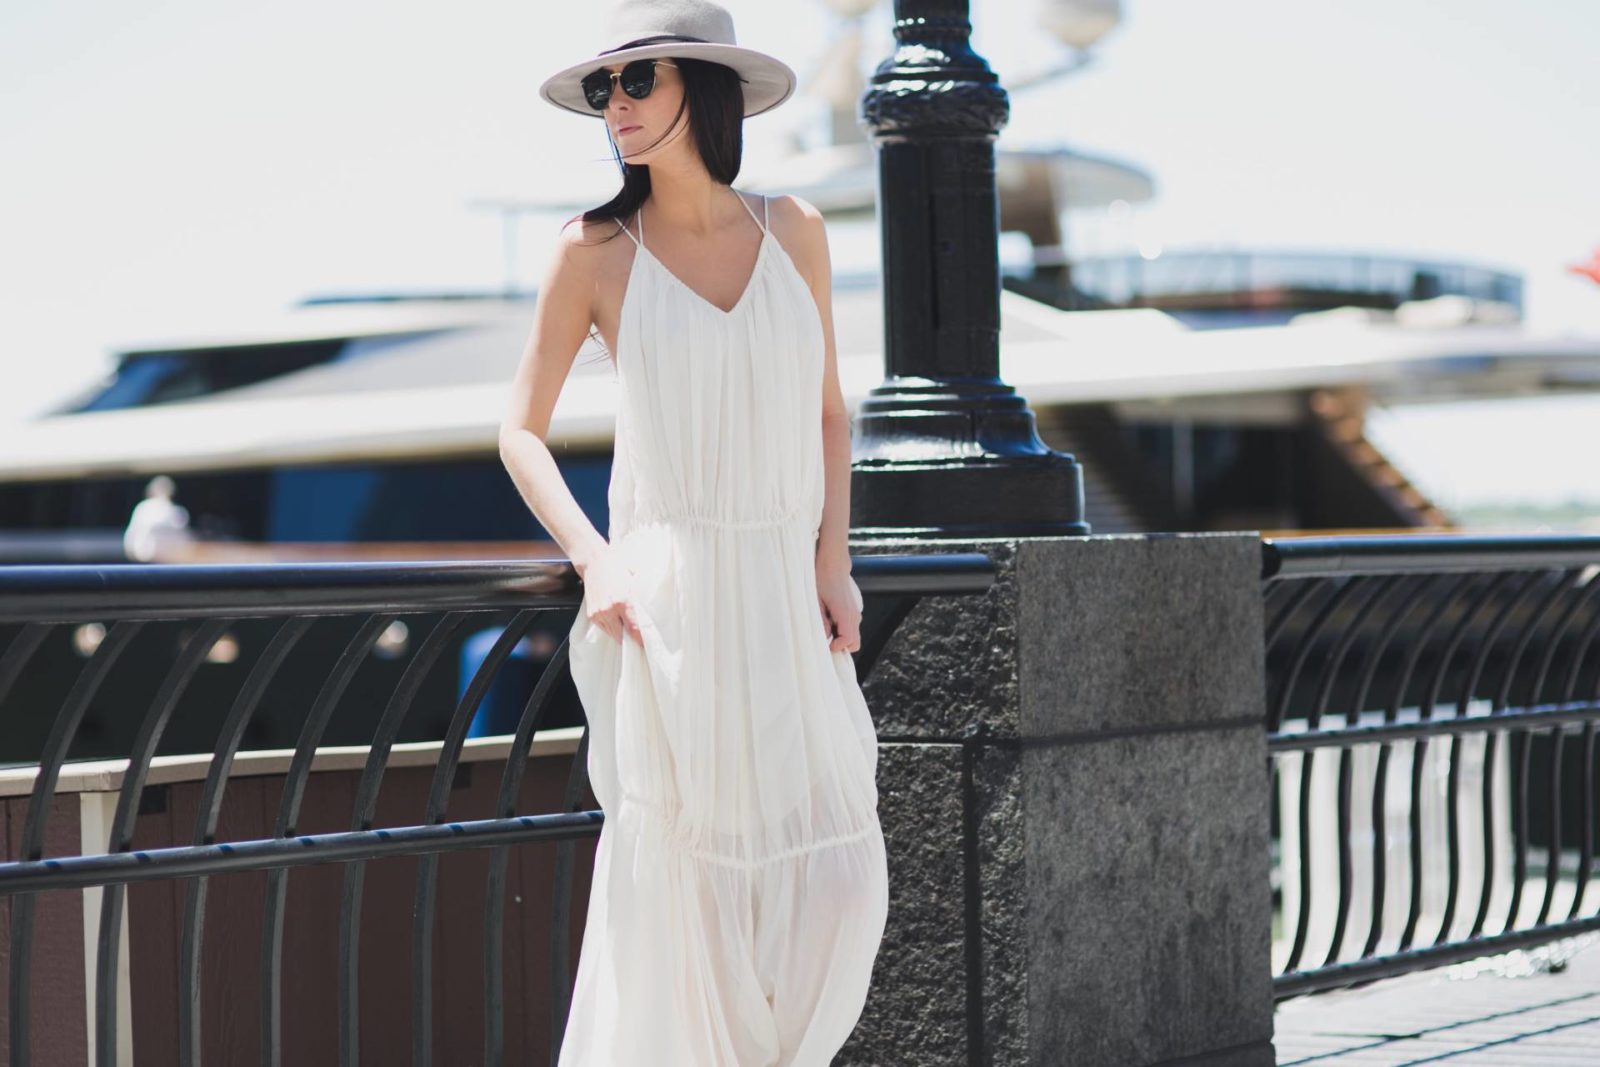 Summer Style: The Perfect Vacation Maxi by H&M